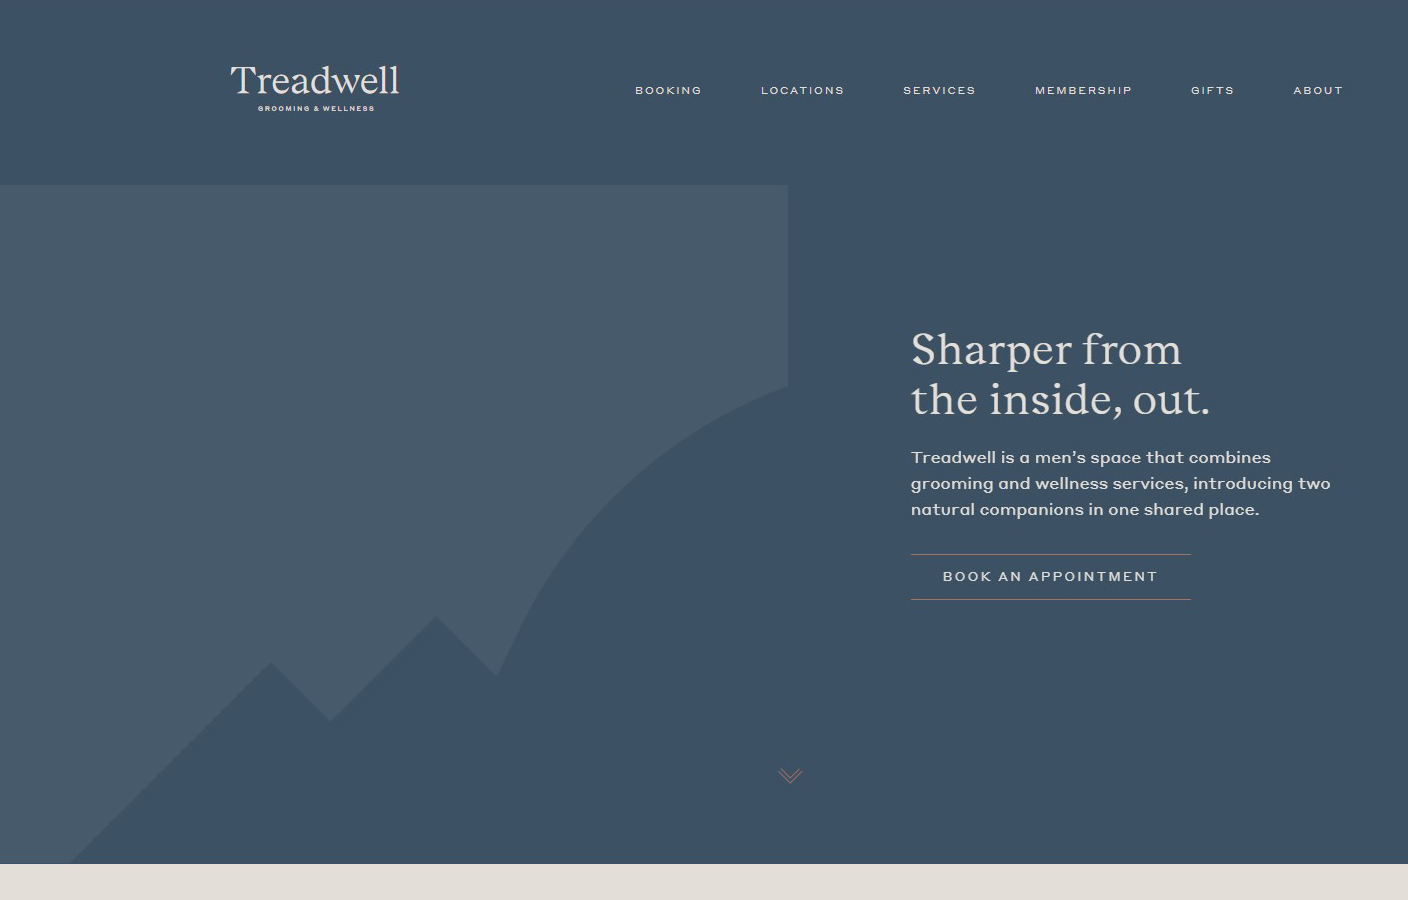 treadwell.com - Men's Grooming and Wellness in Houston, Texas